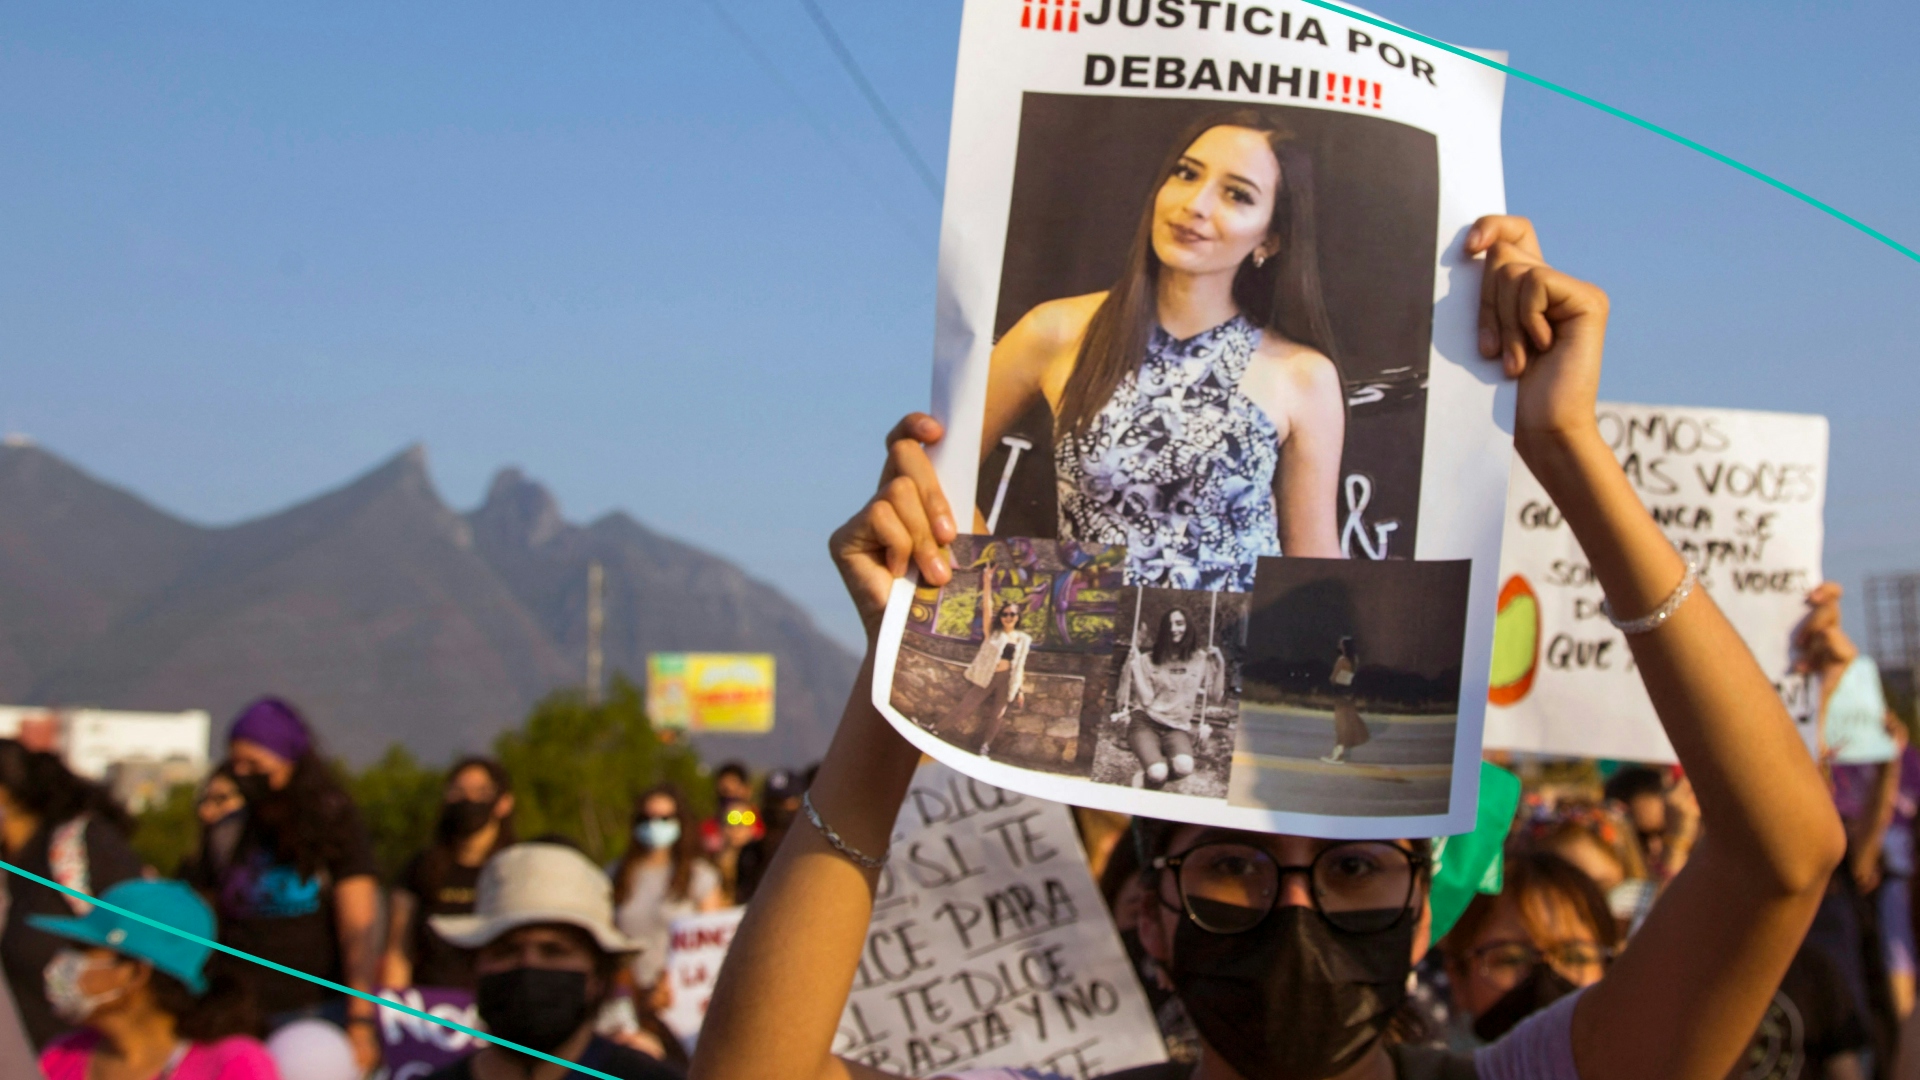 A protester holds up a photo of Debanhi Escobar at a demonstration against femicide in Mexico